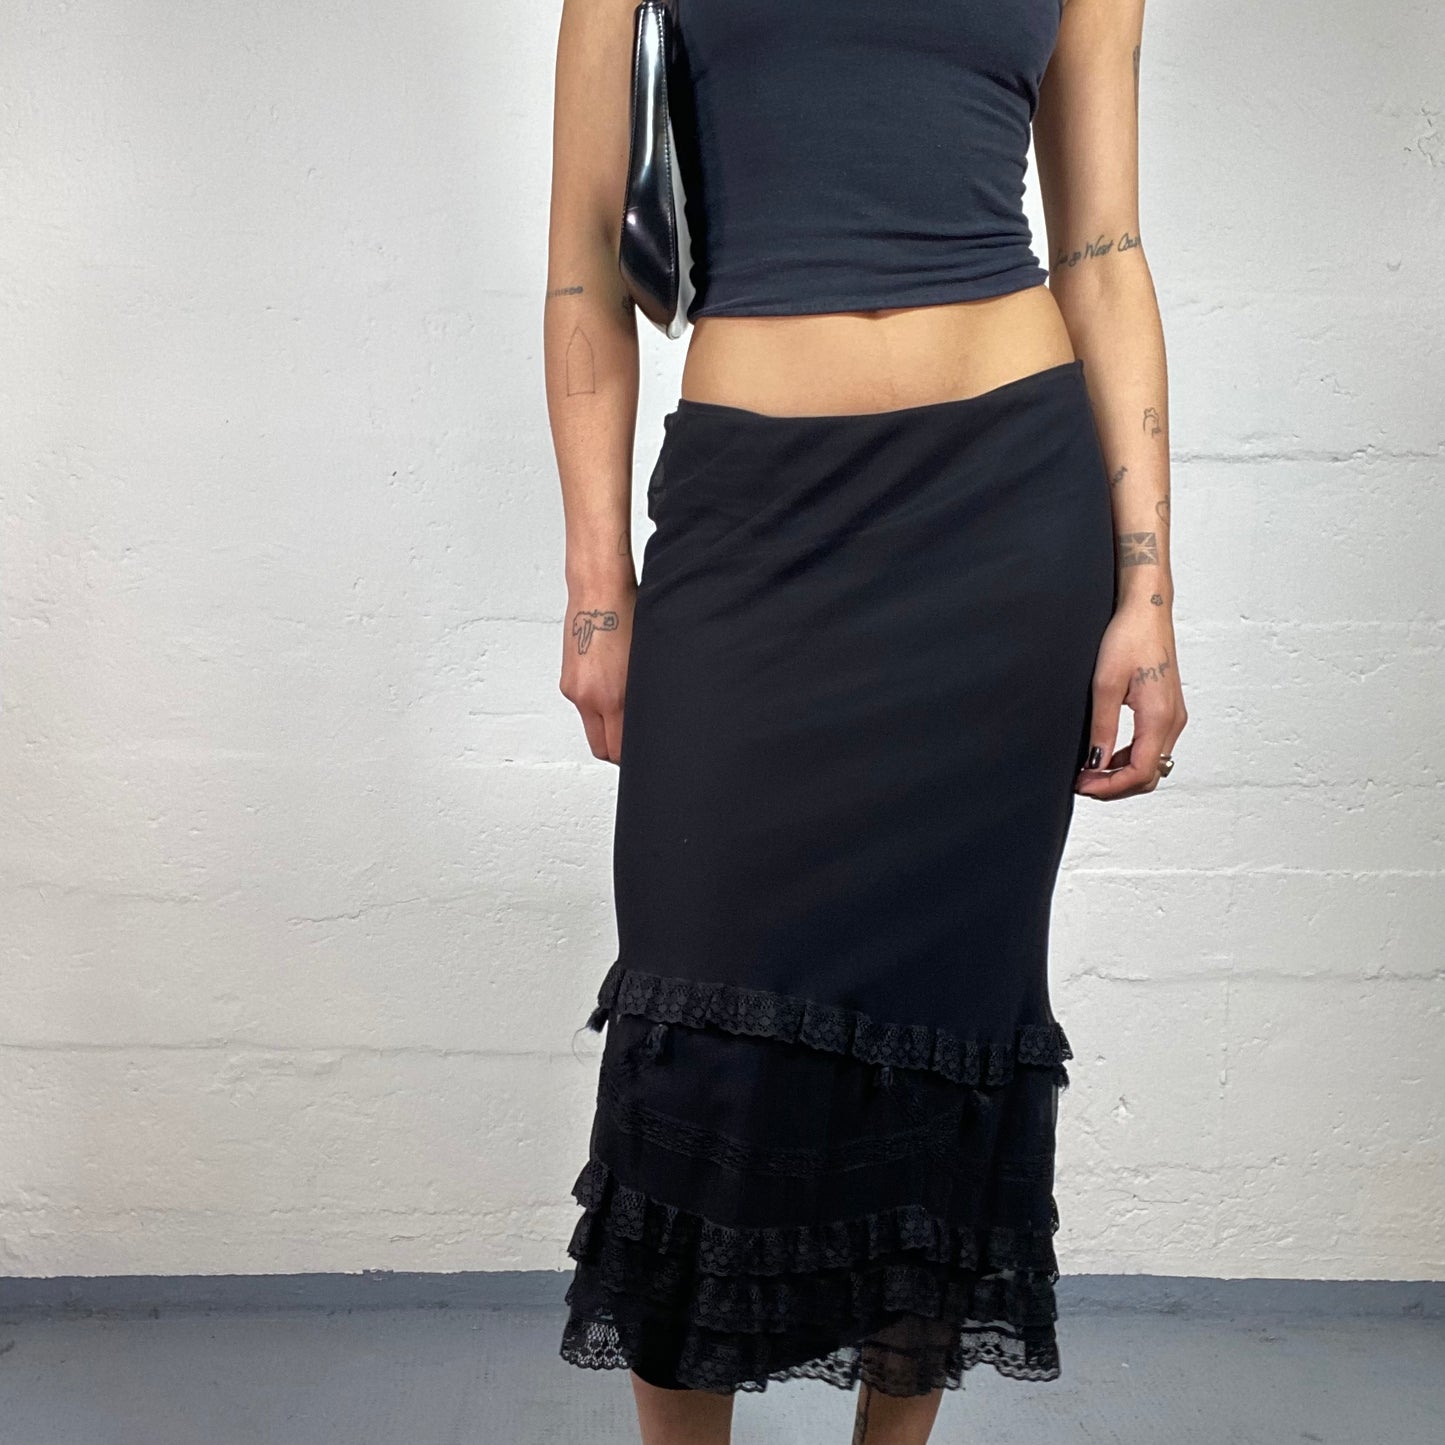 Vintage 2000's Betsey Johnson Romantic Black Long Midi Skirt with Layered Lace Bottom Details (M)